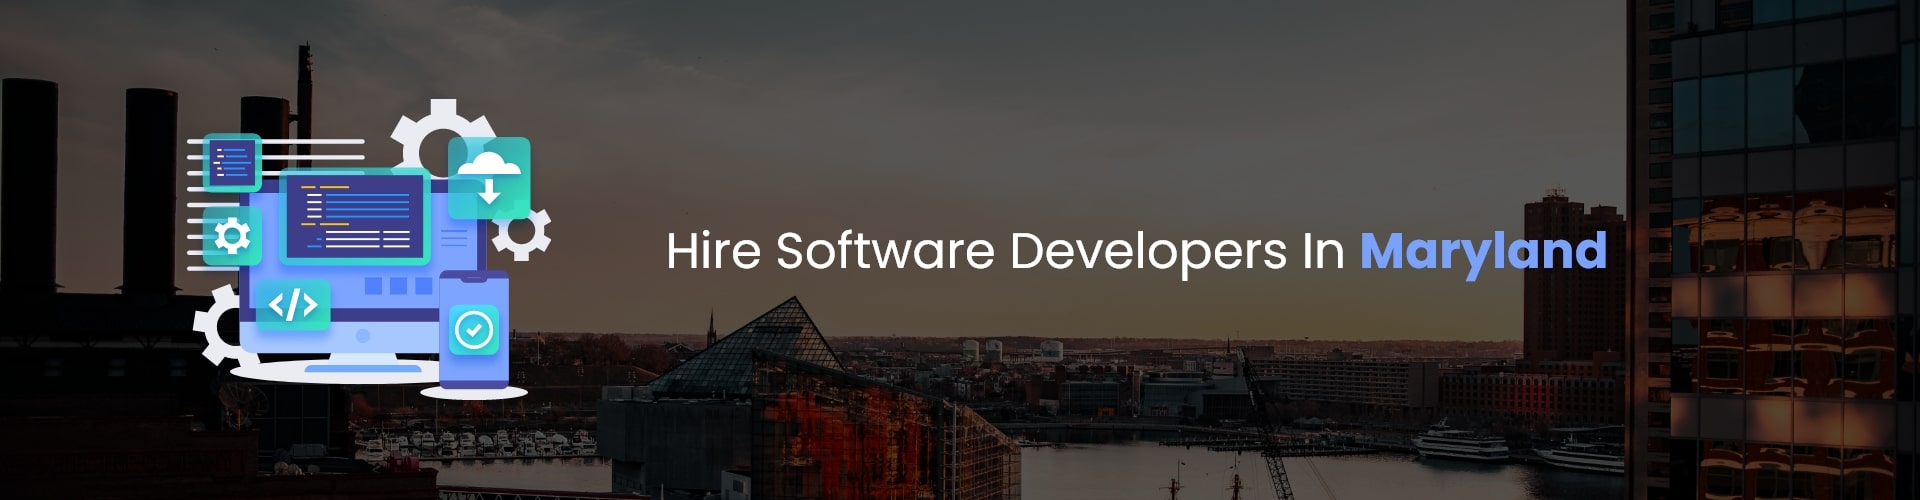 hire software developers in maryland